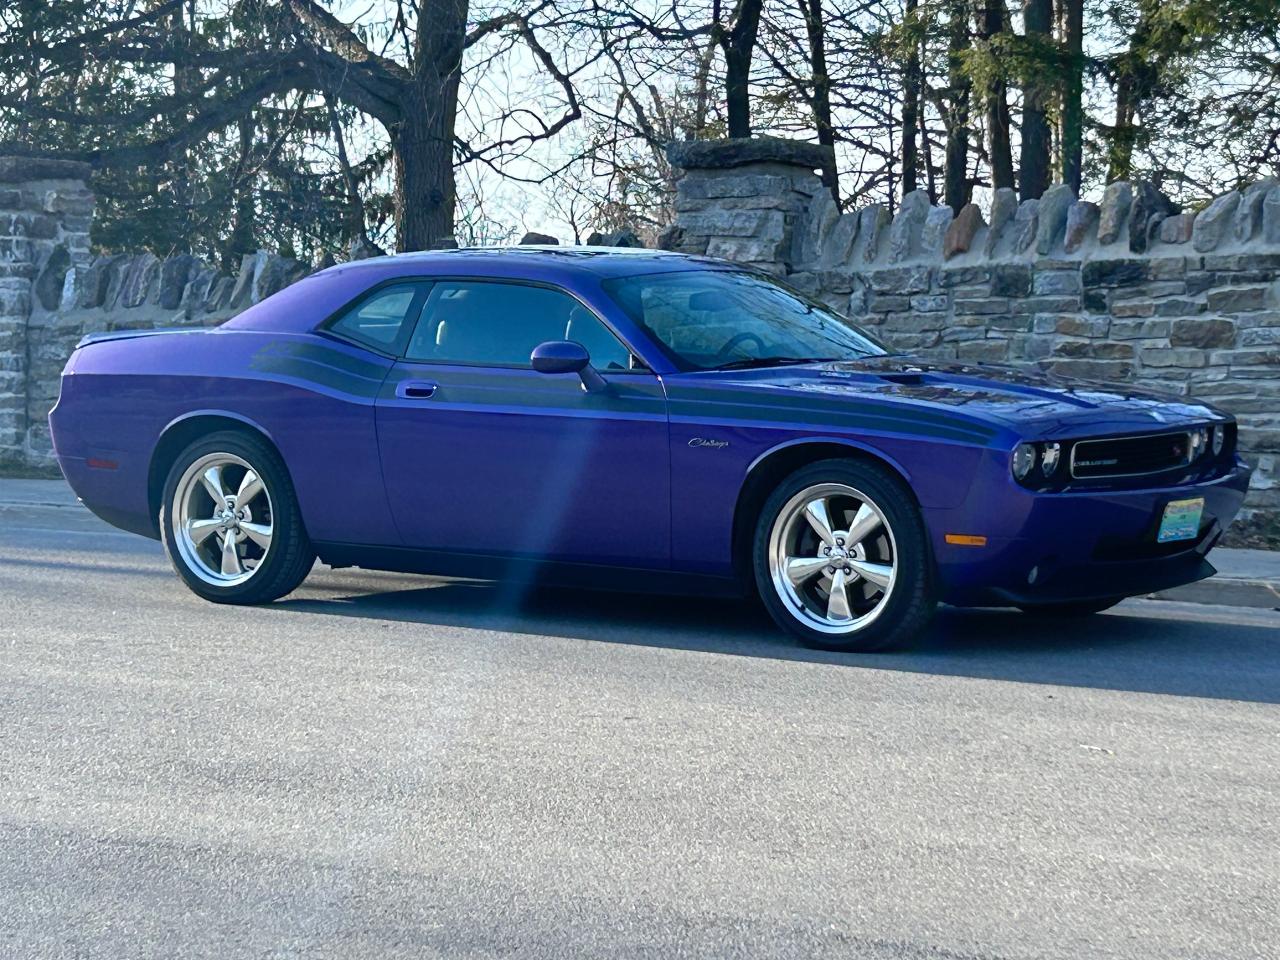 2010 Dodge Challenger 2dr Manual Coupe R/T Classic - Photo #3